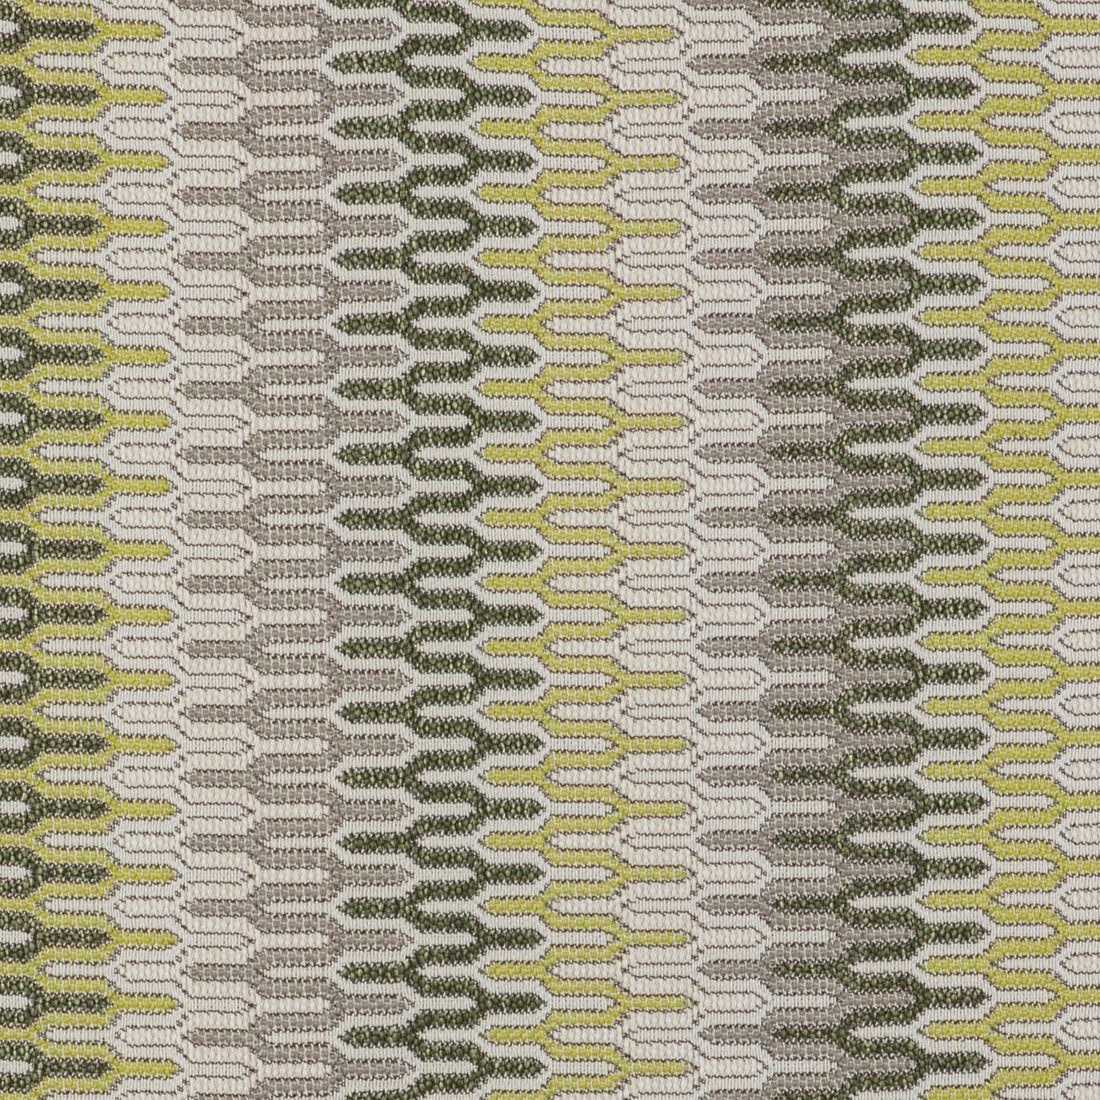 Costuras fabric in verde color - pattern GDT5514.003.0 - by Gaston y Daniela in the Gaston Libreria collection